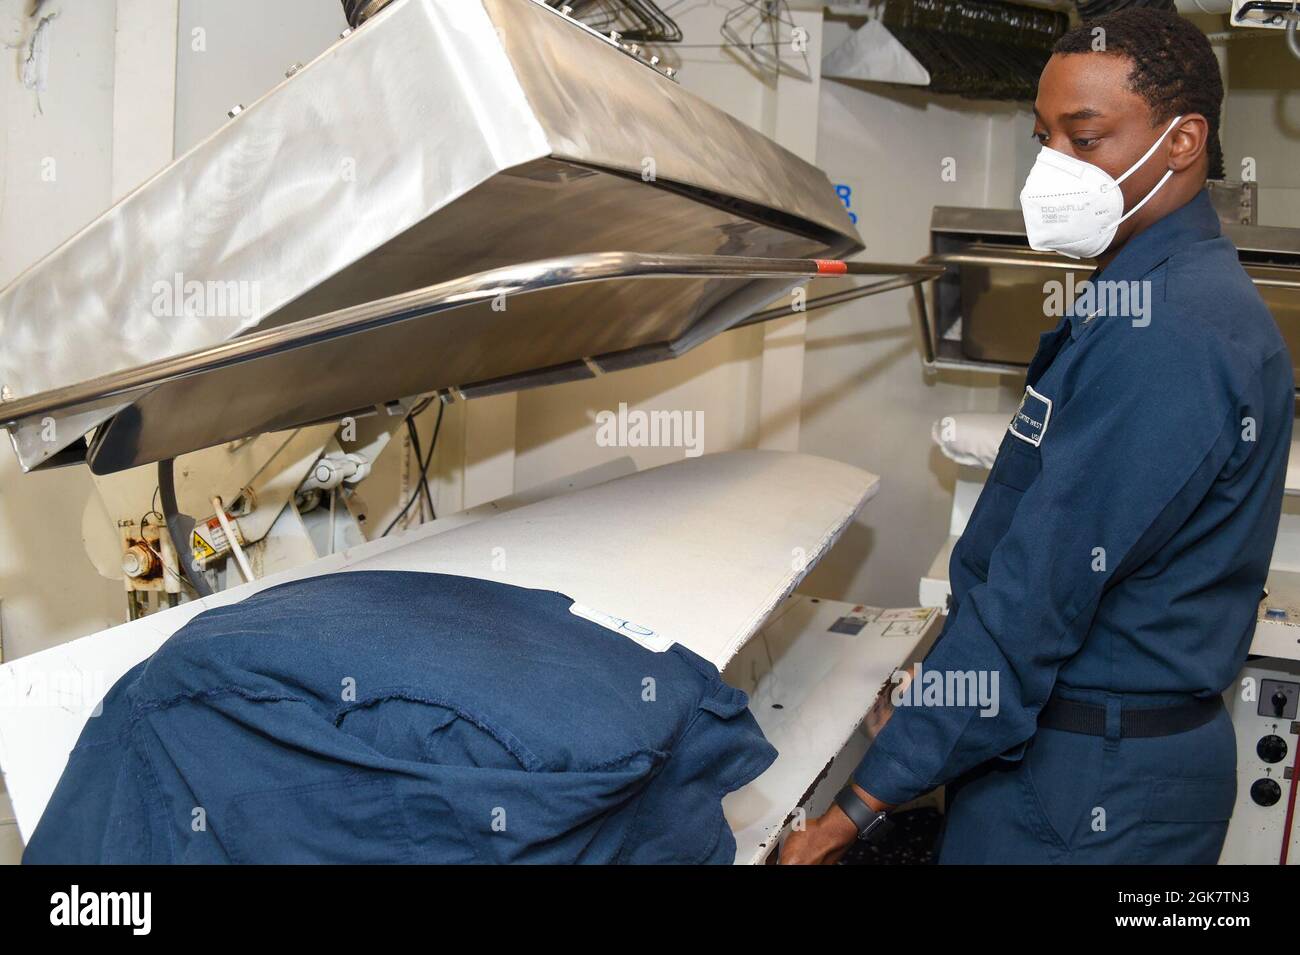 210828-N-UP745-1221 ATLANTIC OCEAN (Aug. 28, 2021) Retail Services Specialist 3rd Class Cortez West, from Tampa Bay, Florida, flat presses a coverall aboard the USS Forrest Sherman (DDG 98). USS Forrest Sherman (DDG 98) participates in FRONTIER SENTINEL alongside U.S. Coast Guard, and Canadian Allies to enhance their Arctic capabilities Stock Photo